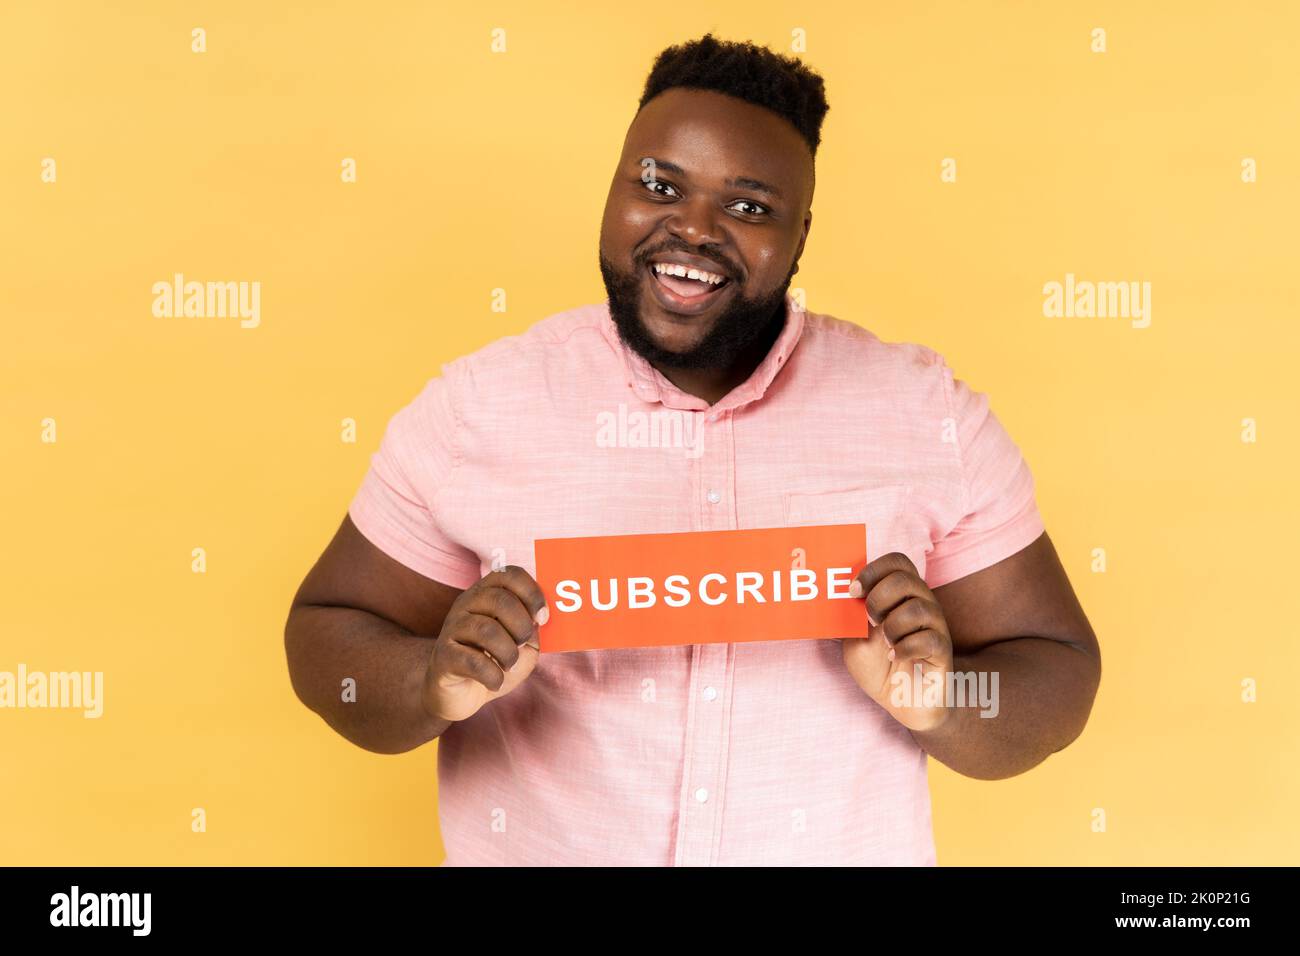 Portrait of cheerful positive bearded man wearing pink shirt holding red card with subscribe inscription, asking to follow his vlog. Indoor studio shot isolated on yellow background. Stock Photo